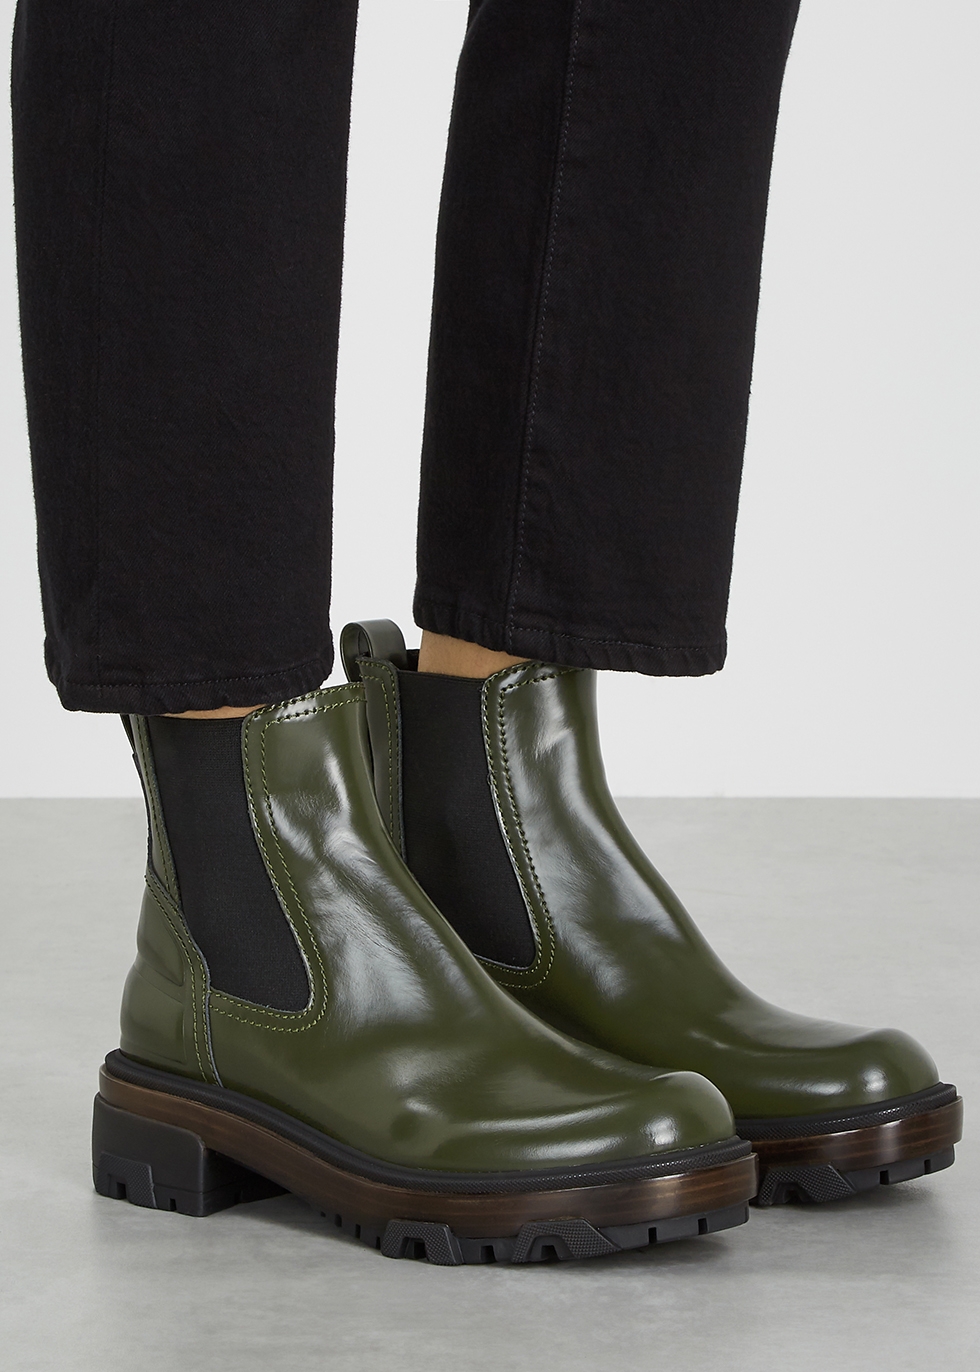 green riding boots